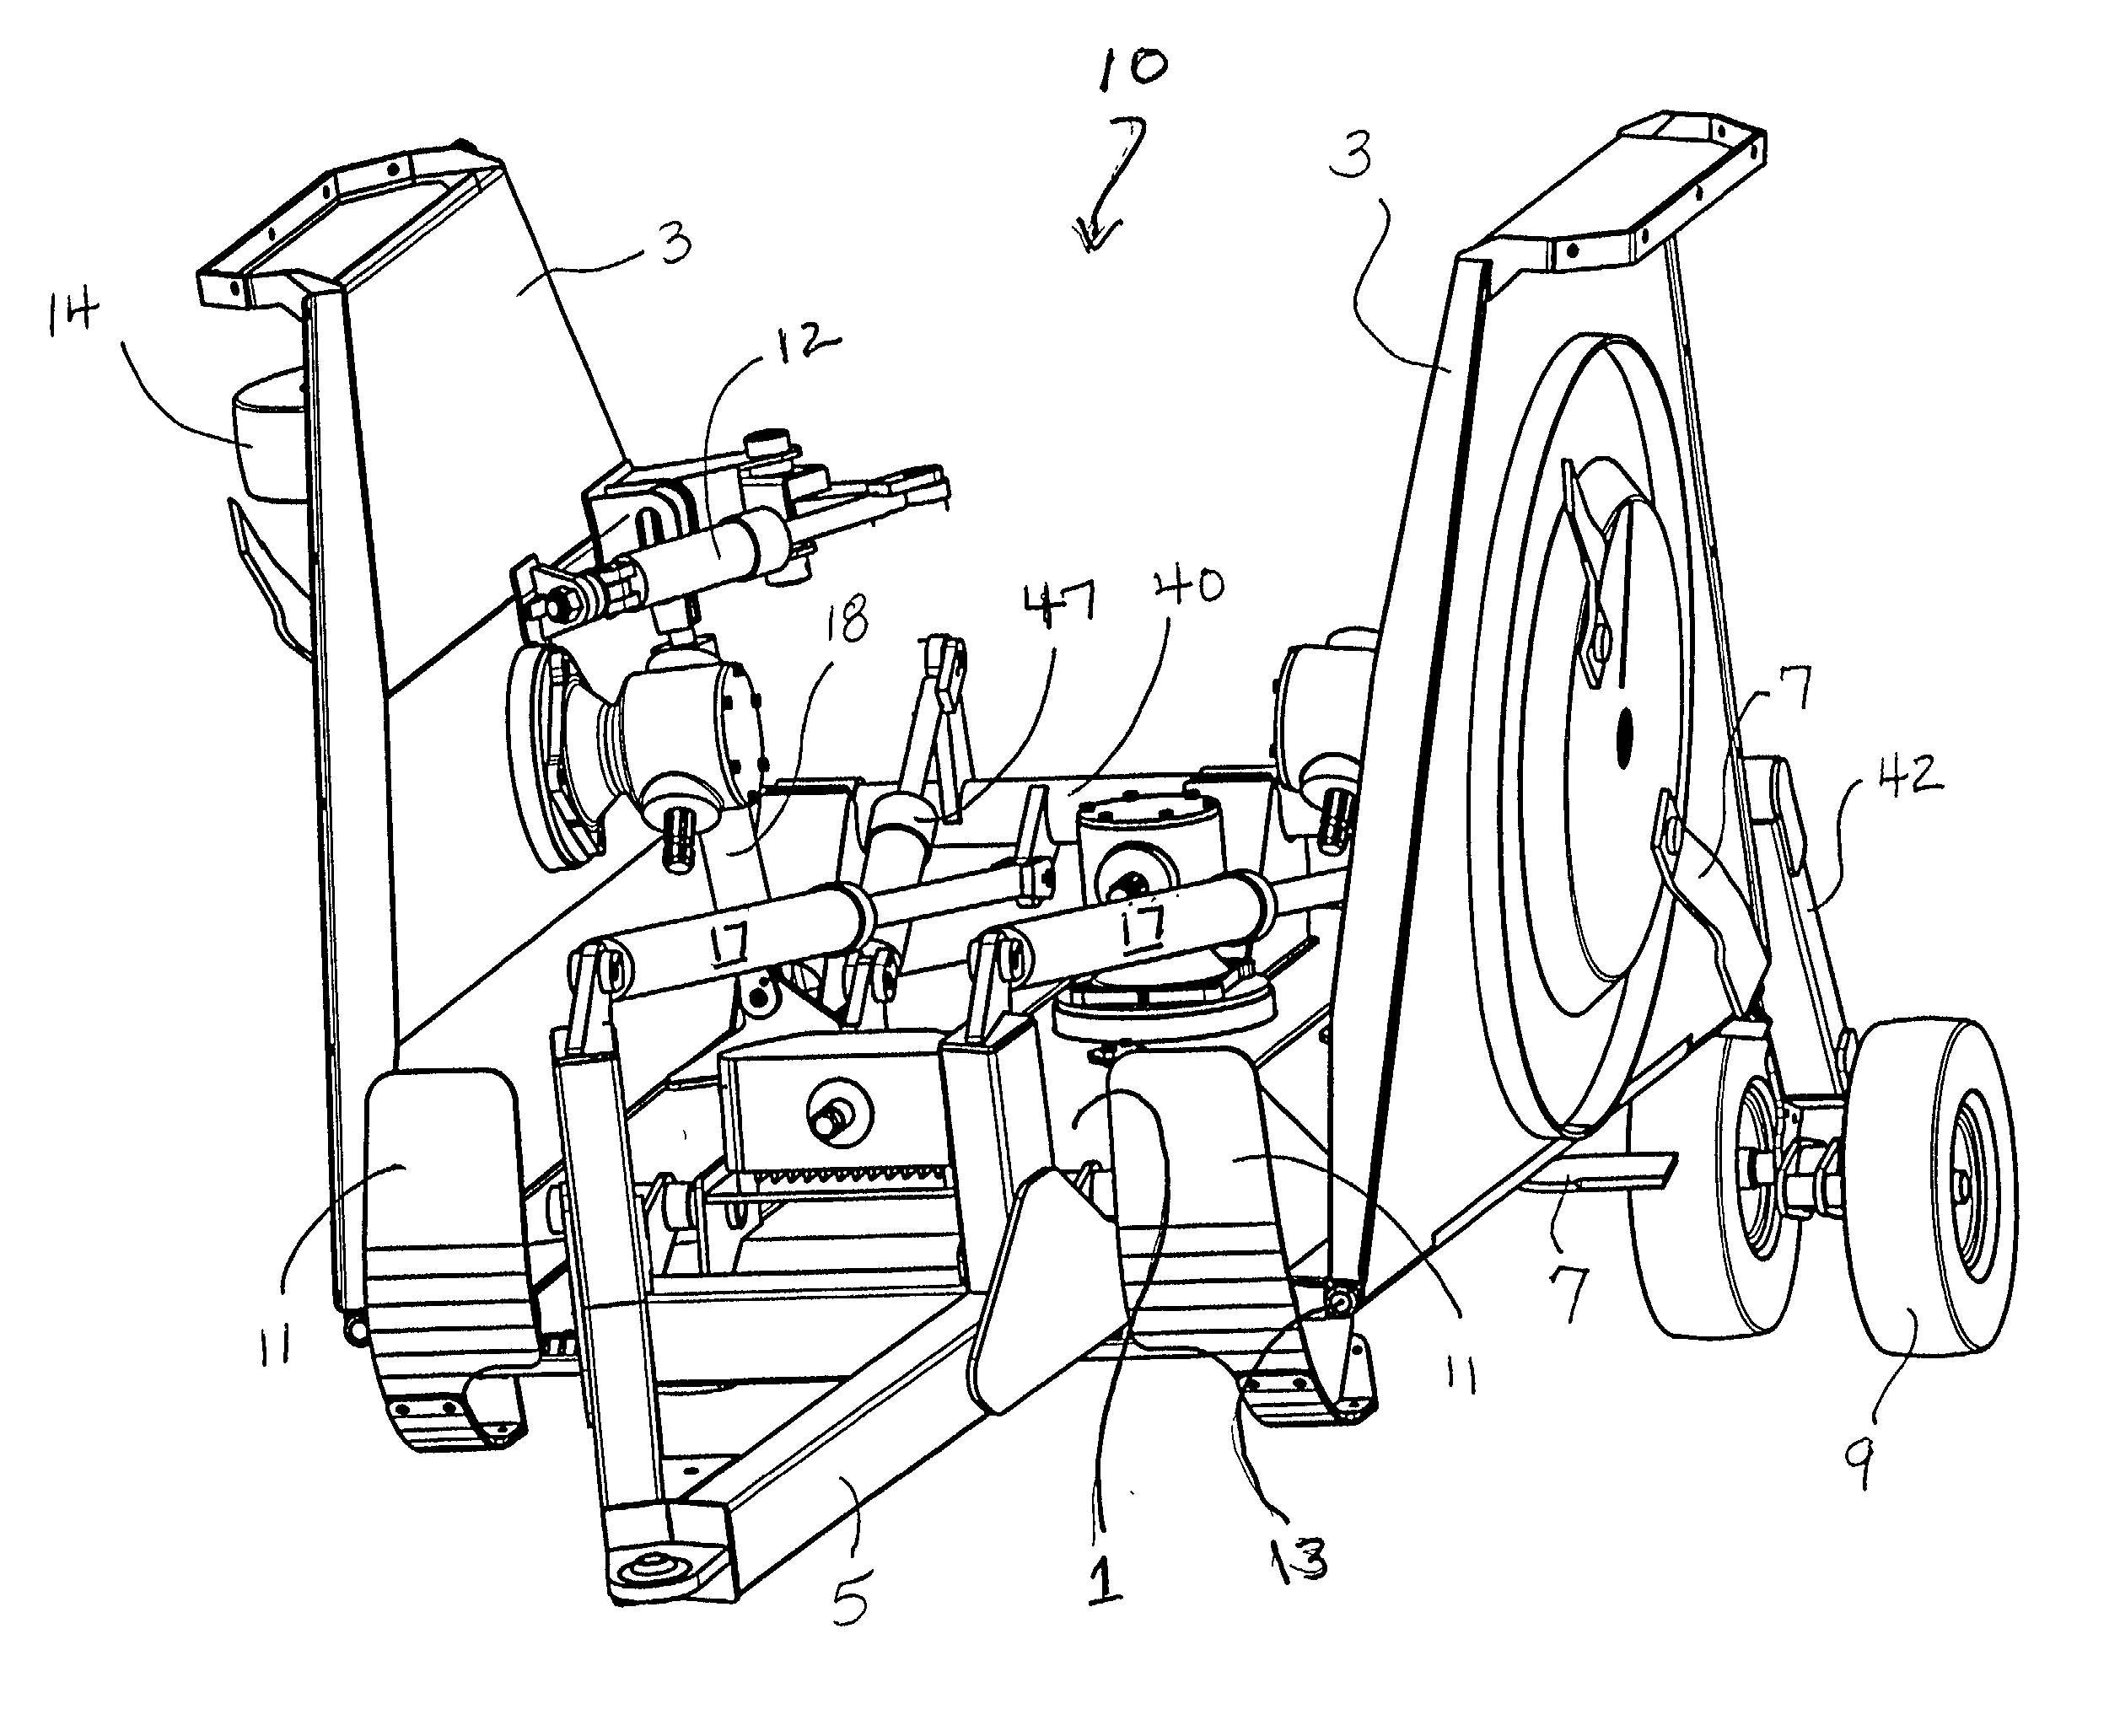 Articulated rotary mower